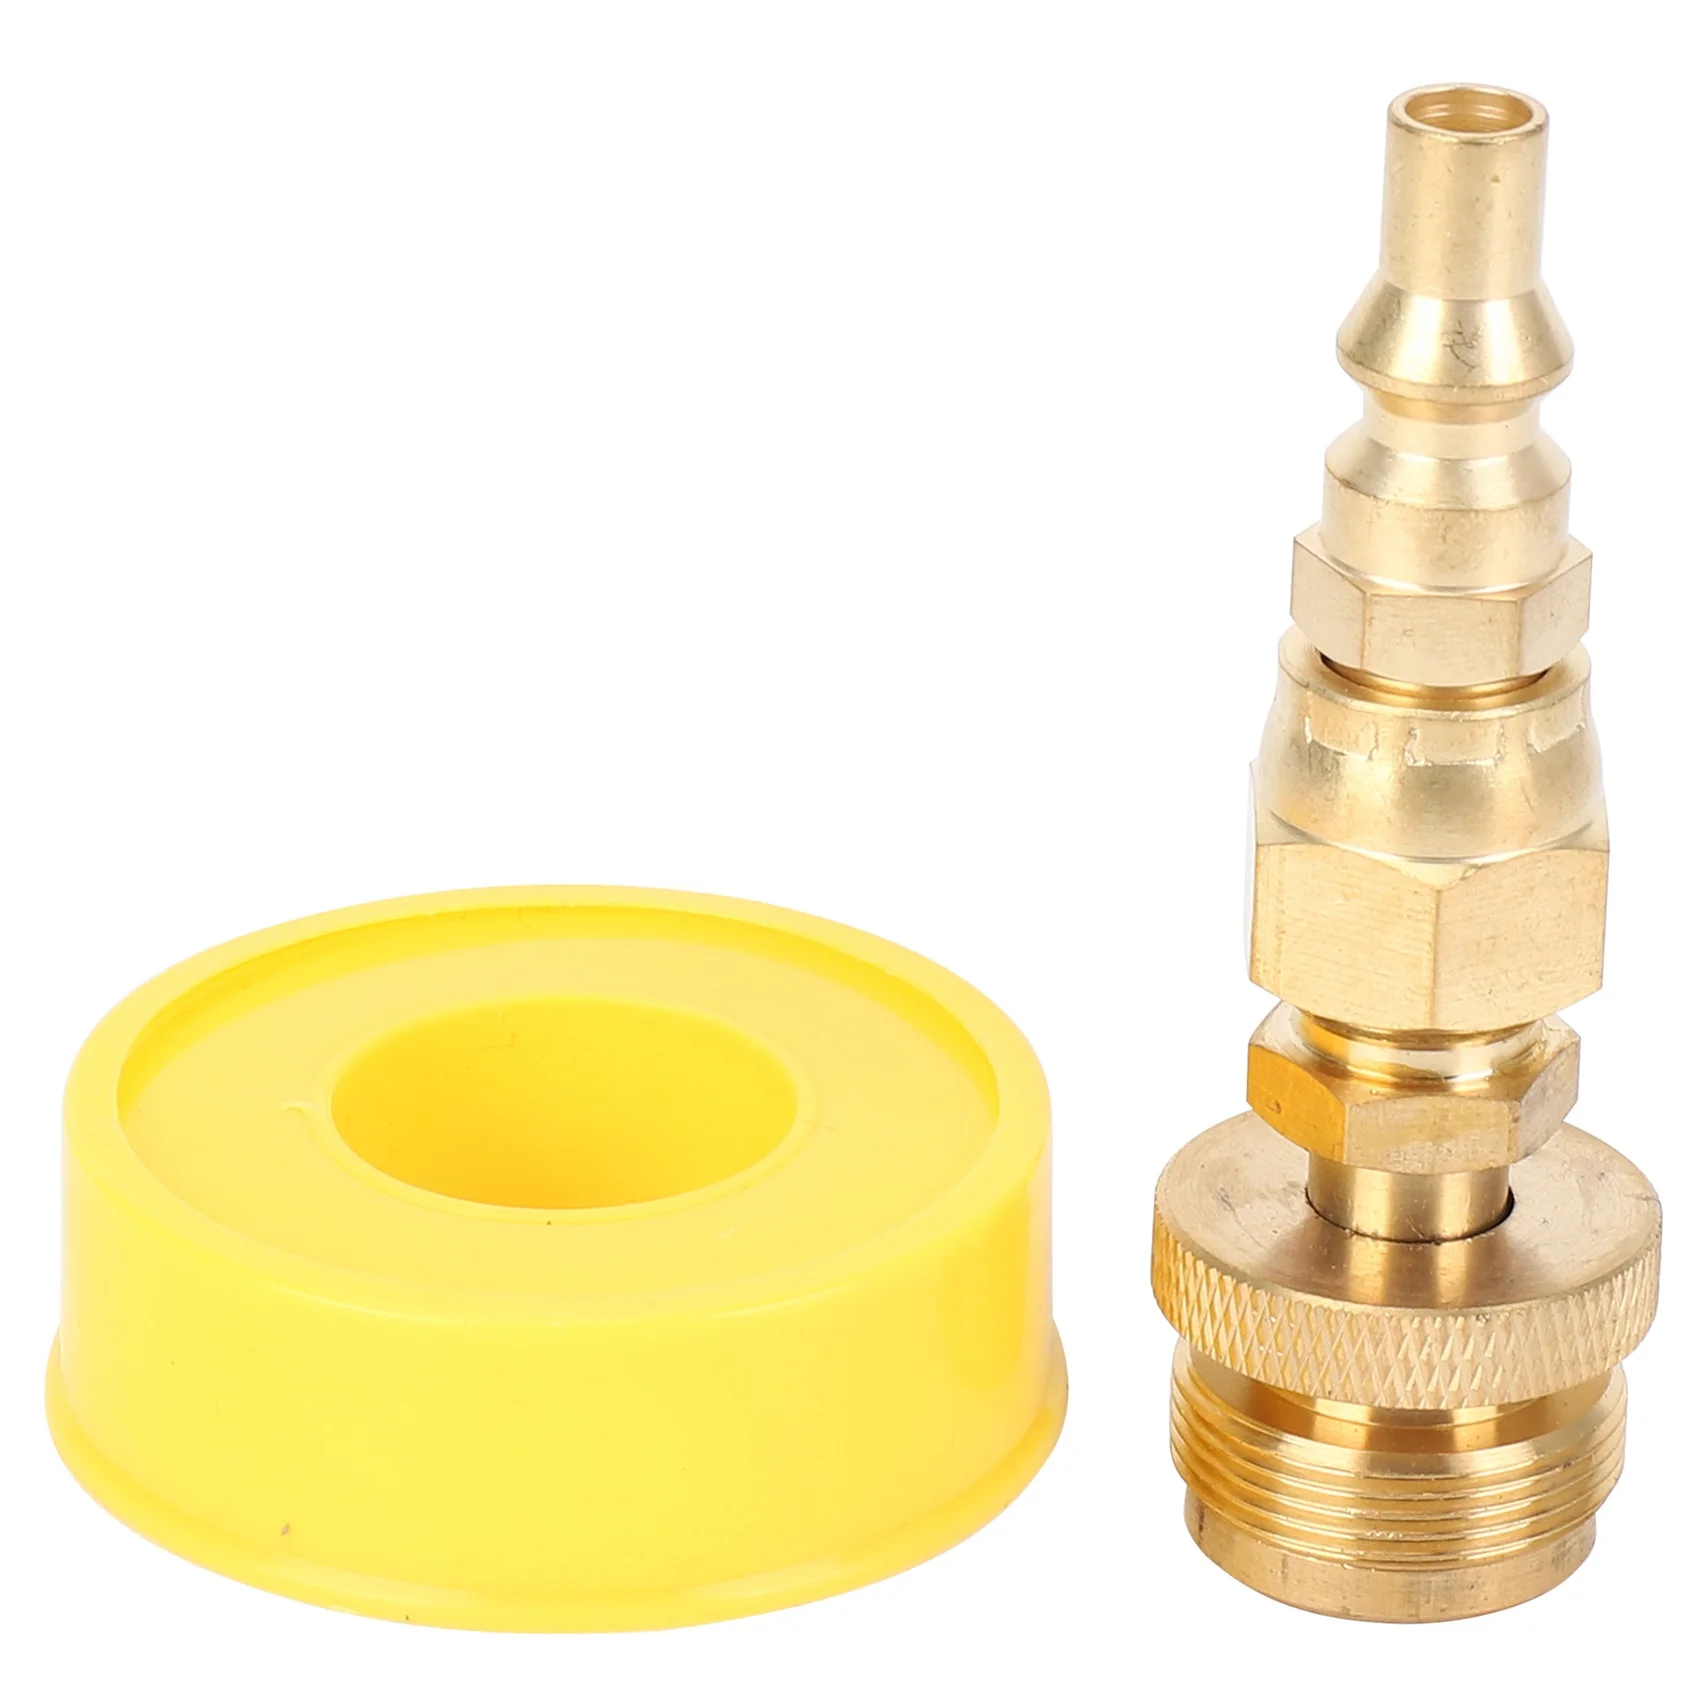 

1LB Propane Regulator Adapter, 1in -20 Male Throwaway Cylinder to 3/8in Male Flare and 1/4in Quick Connect Plug Fitting